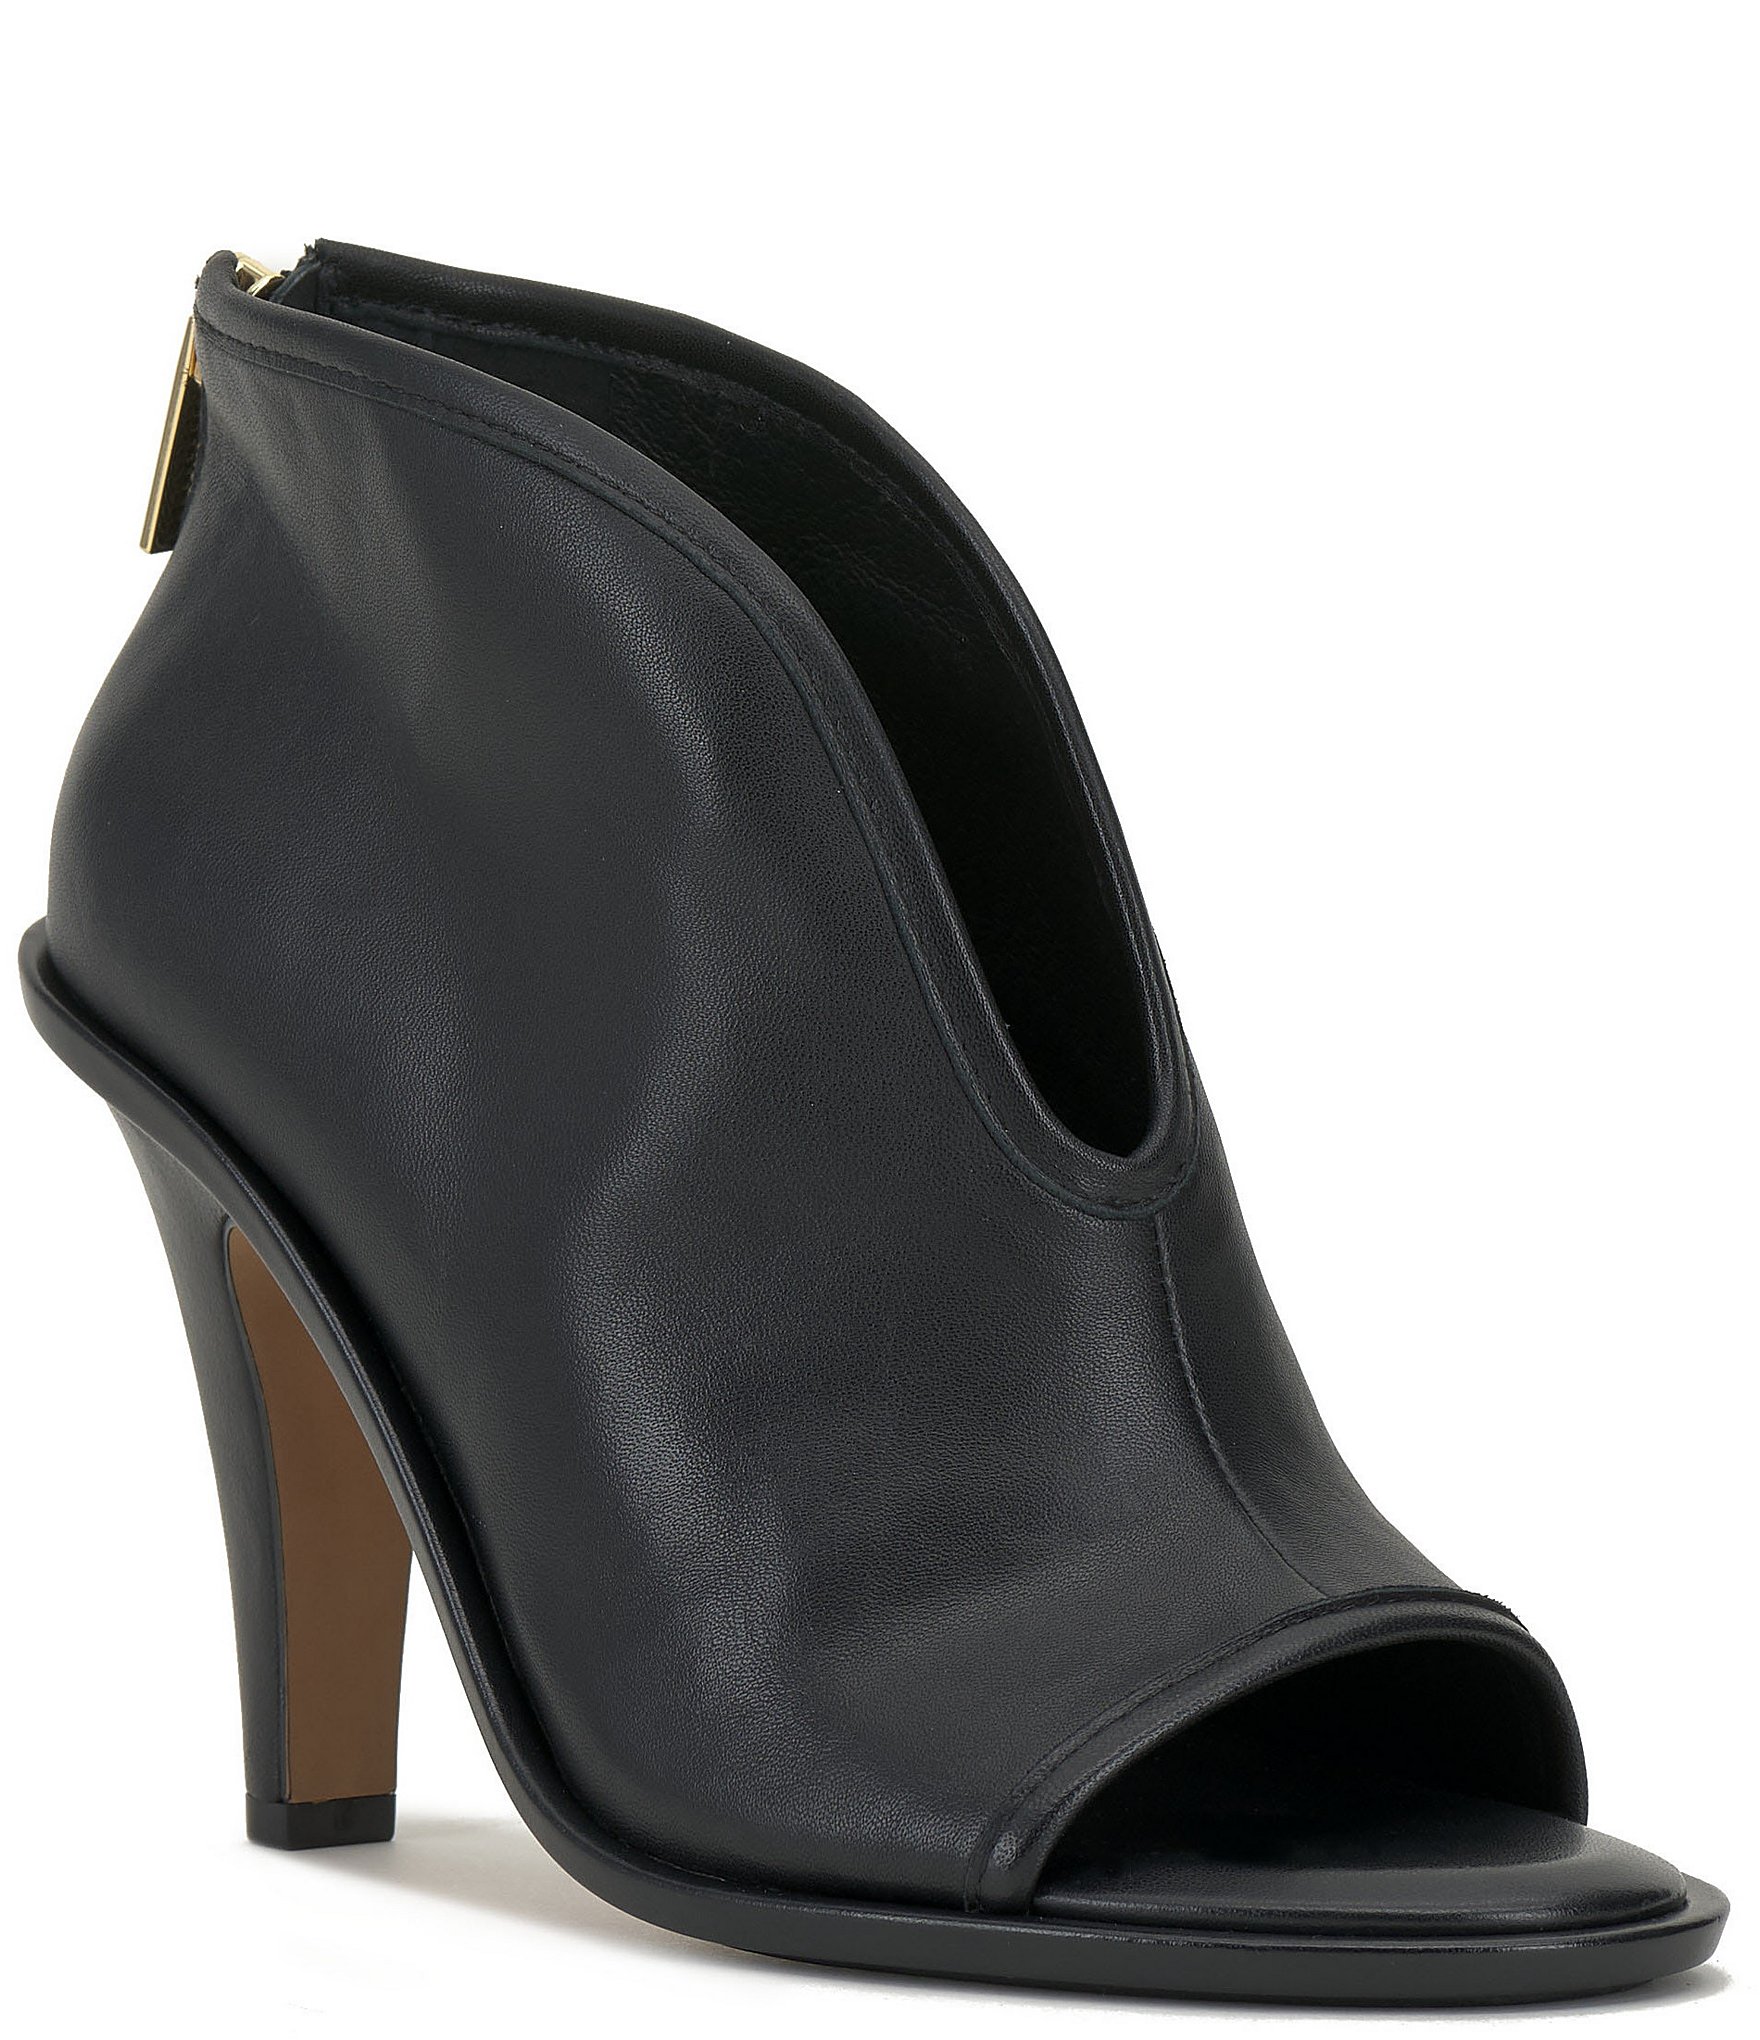 Vince Camuto Finaleigh Leather Heeled Shooties | Dillard's